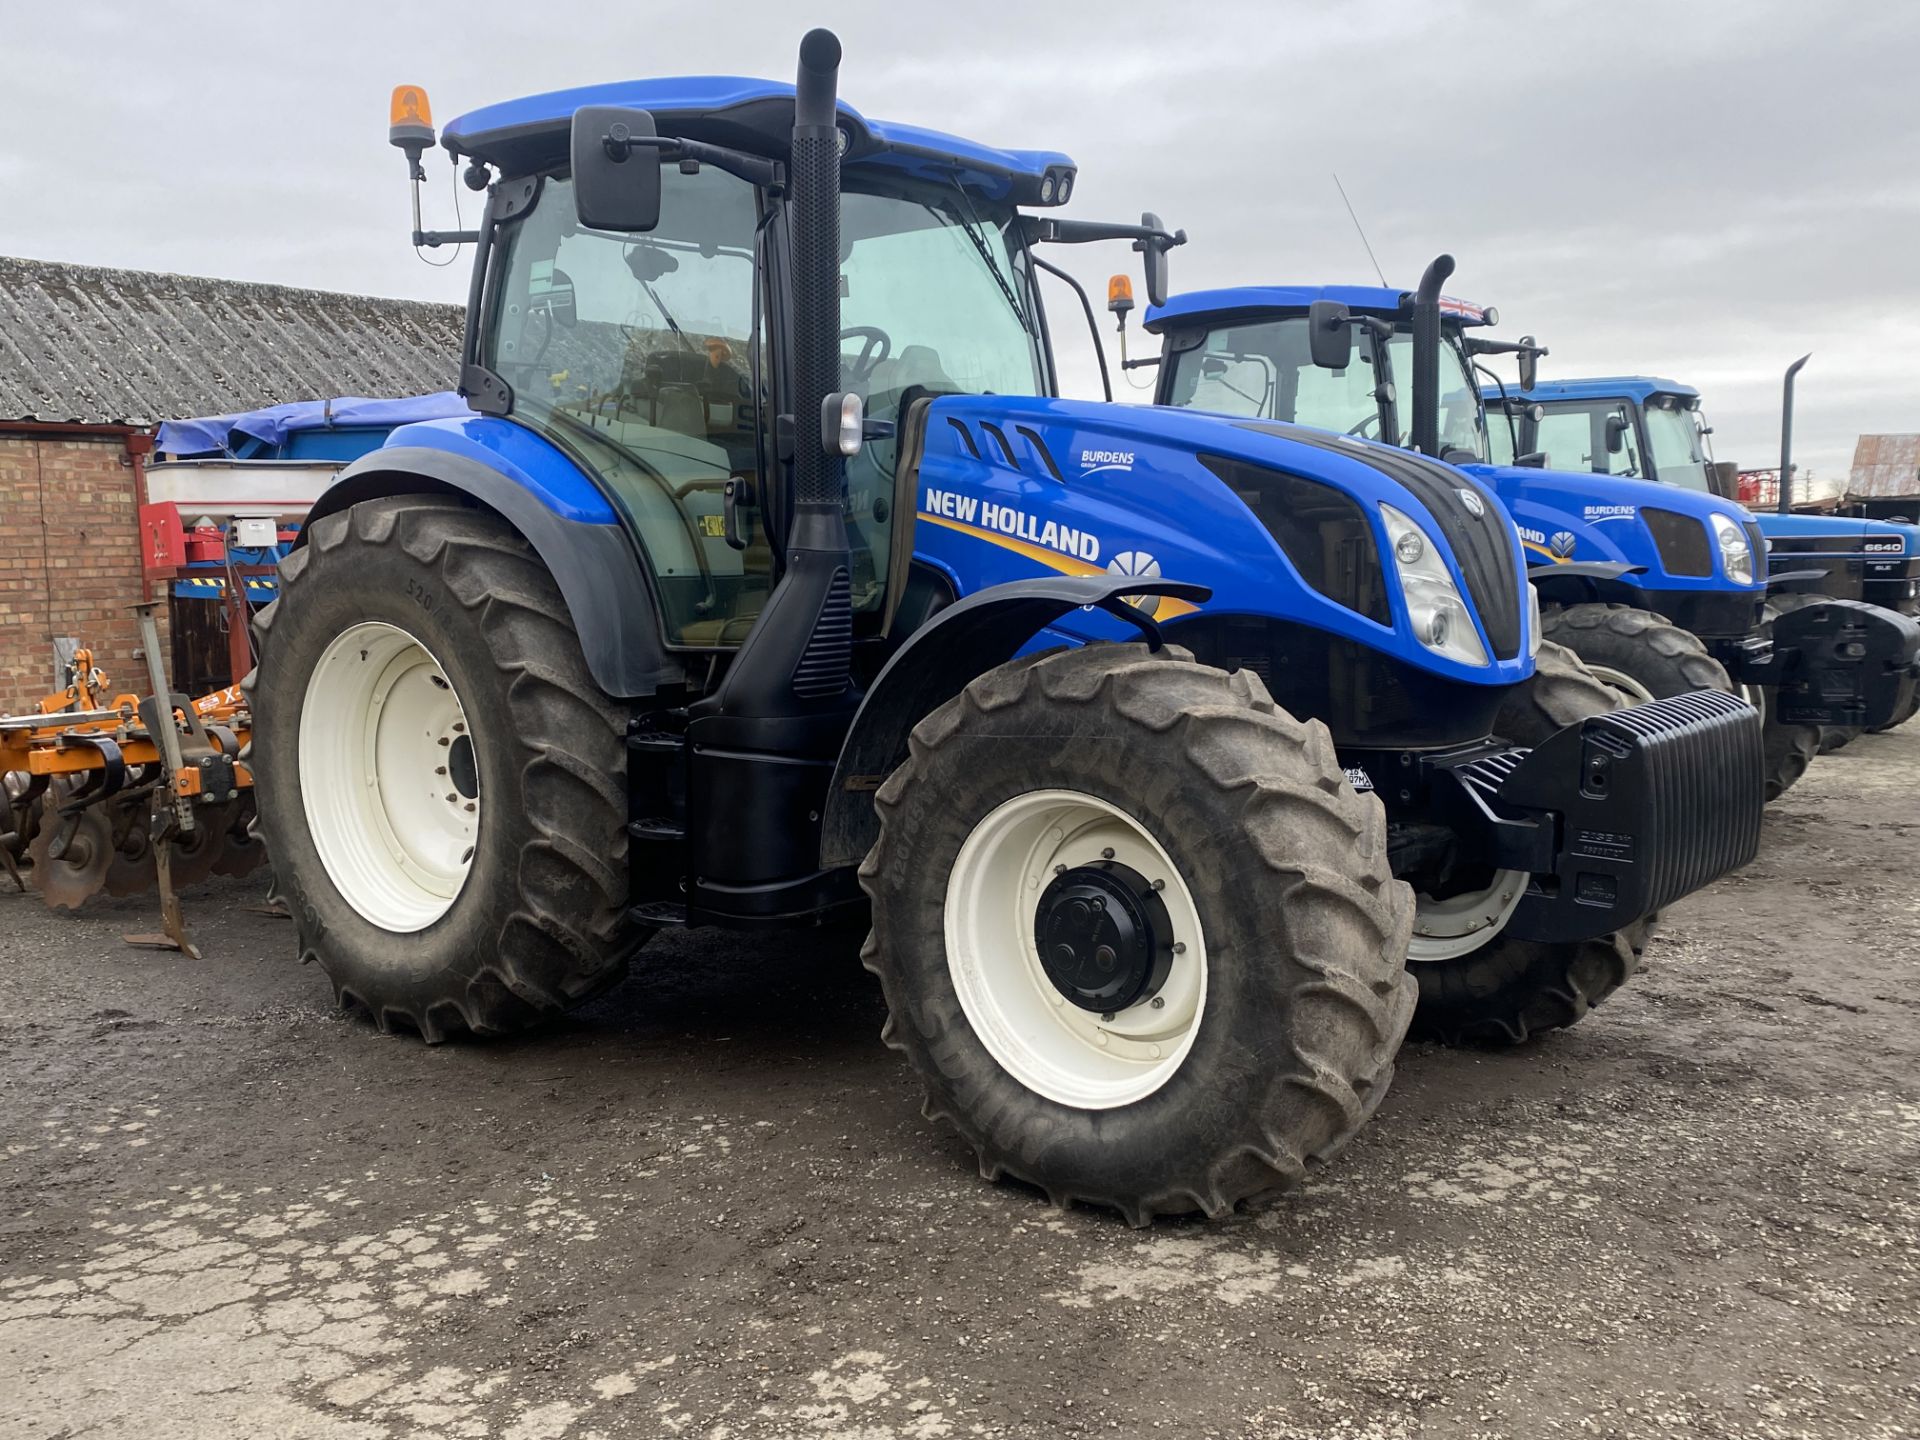 (17) New Holland T6 180 4wd tractor, 50k, Air Brakes, 6 cylinder, 150 hp, 2,900 hrs, Air Con, sold - Bild 2 aus 3